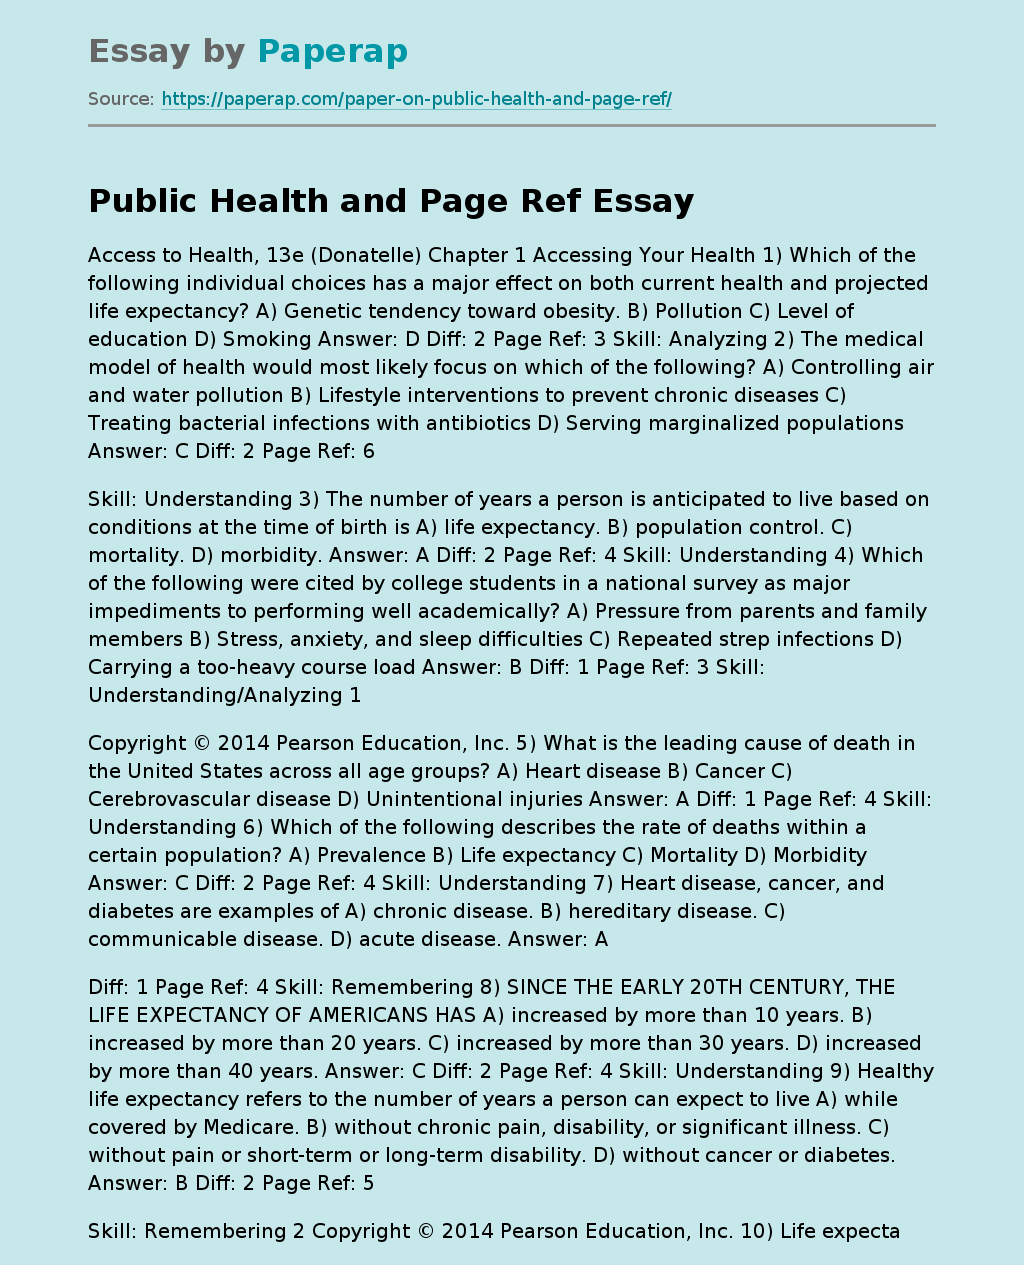 Public Health and Page Ref